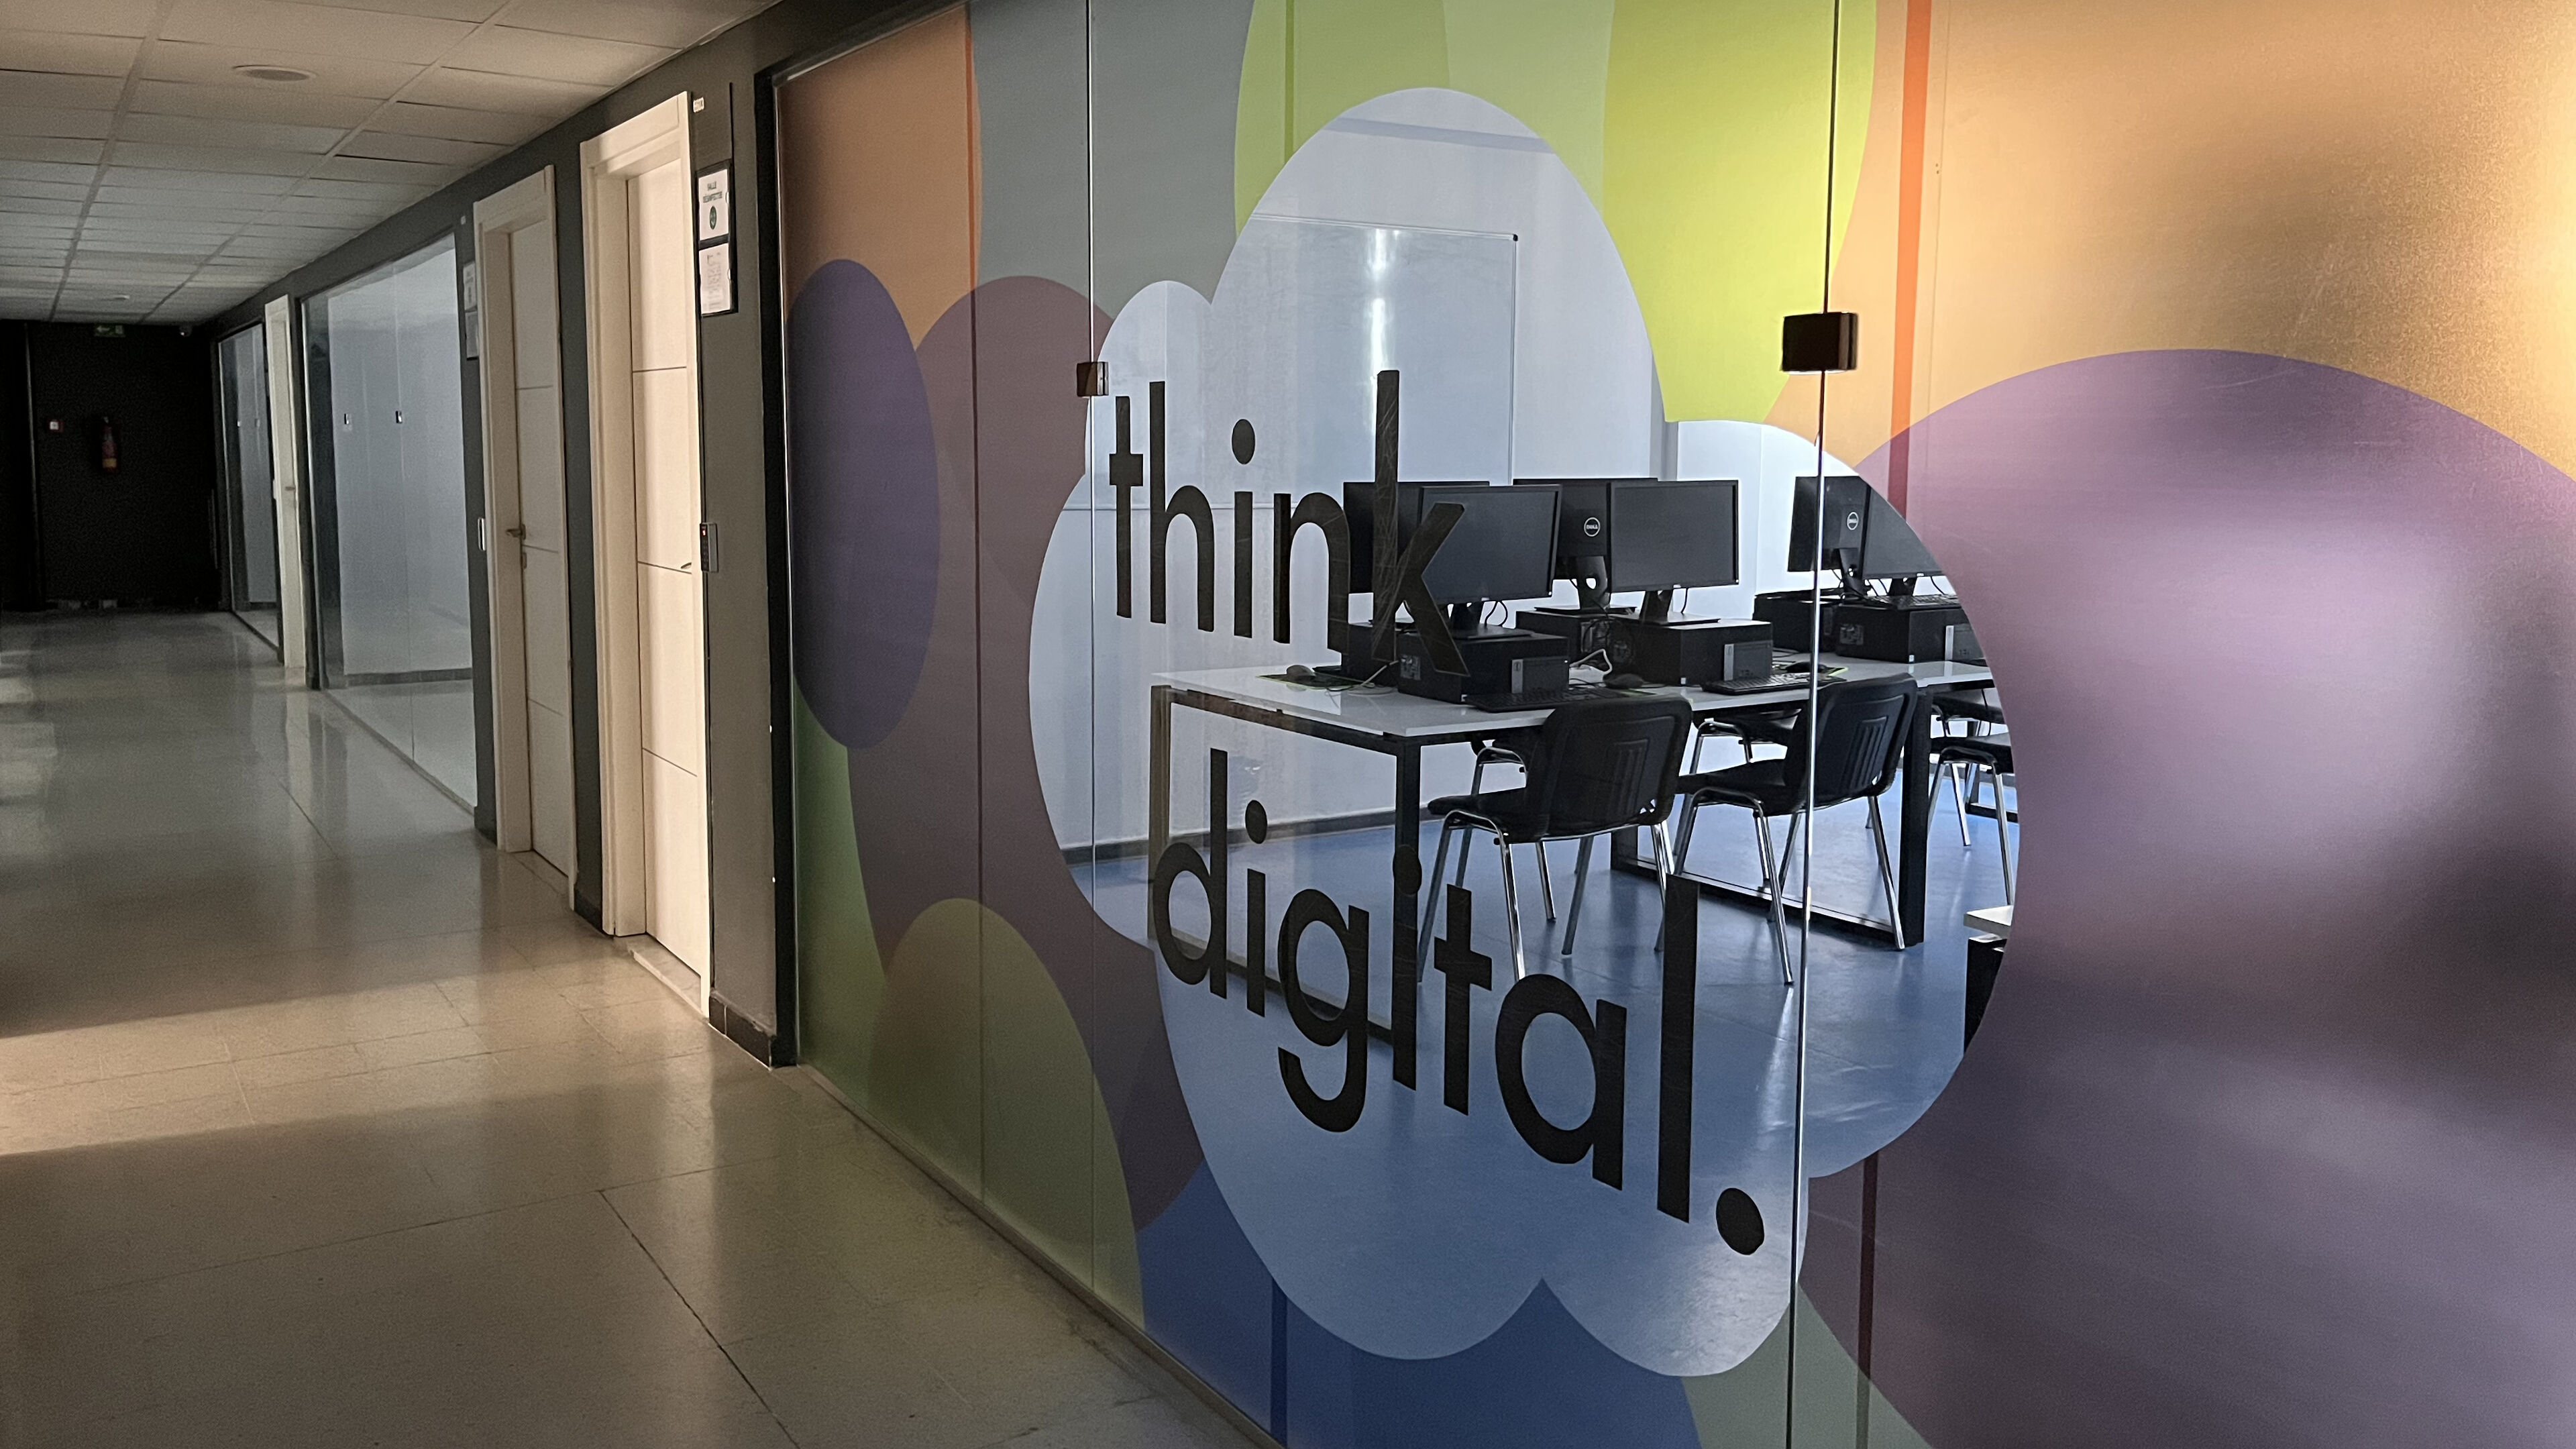 A sleek corridor in a corporate setting featuring a semi-transparent partition with the phrase "think digital." Modern desks and computers are visible through the glass, showcasing a contemporary workspace.